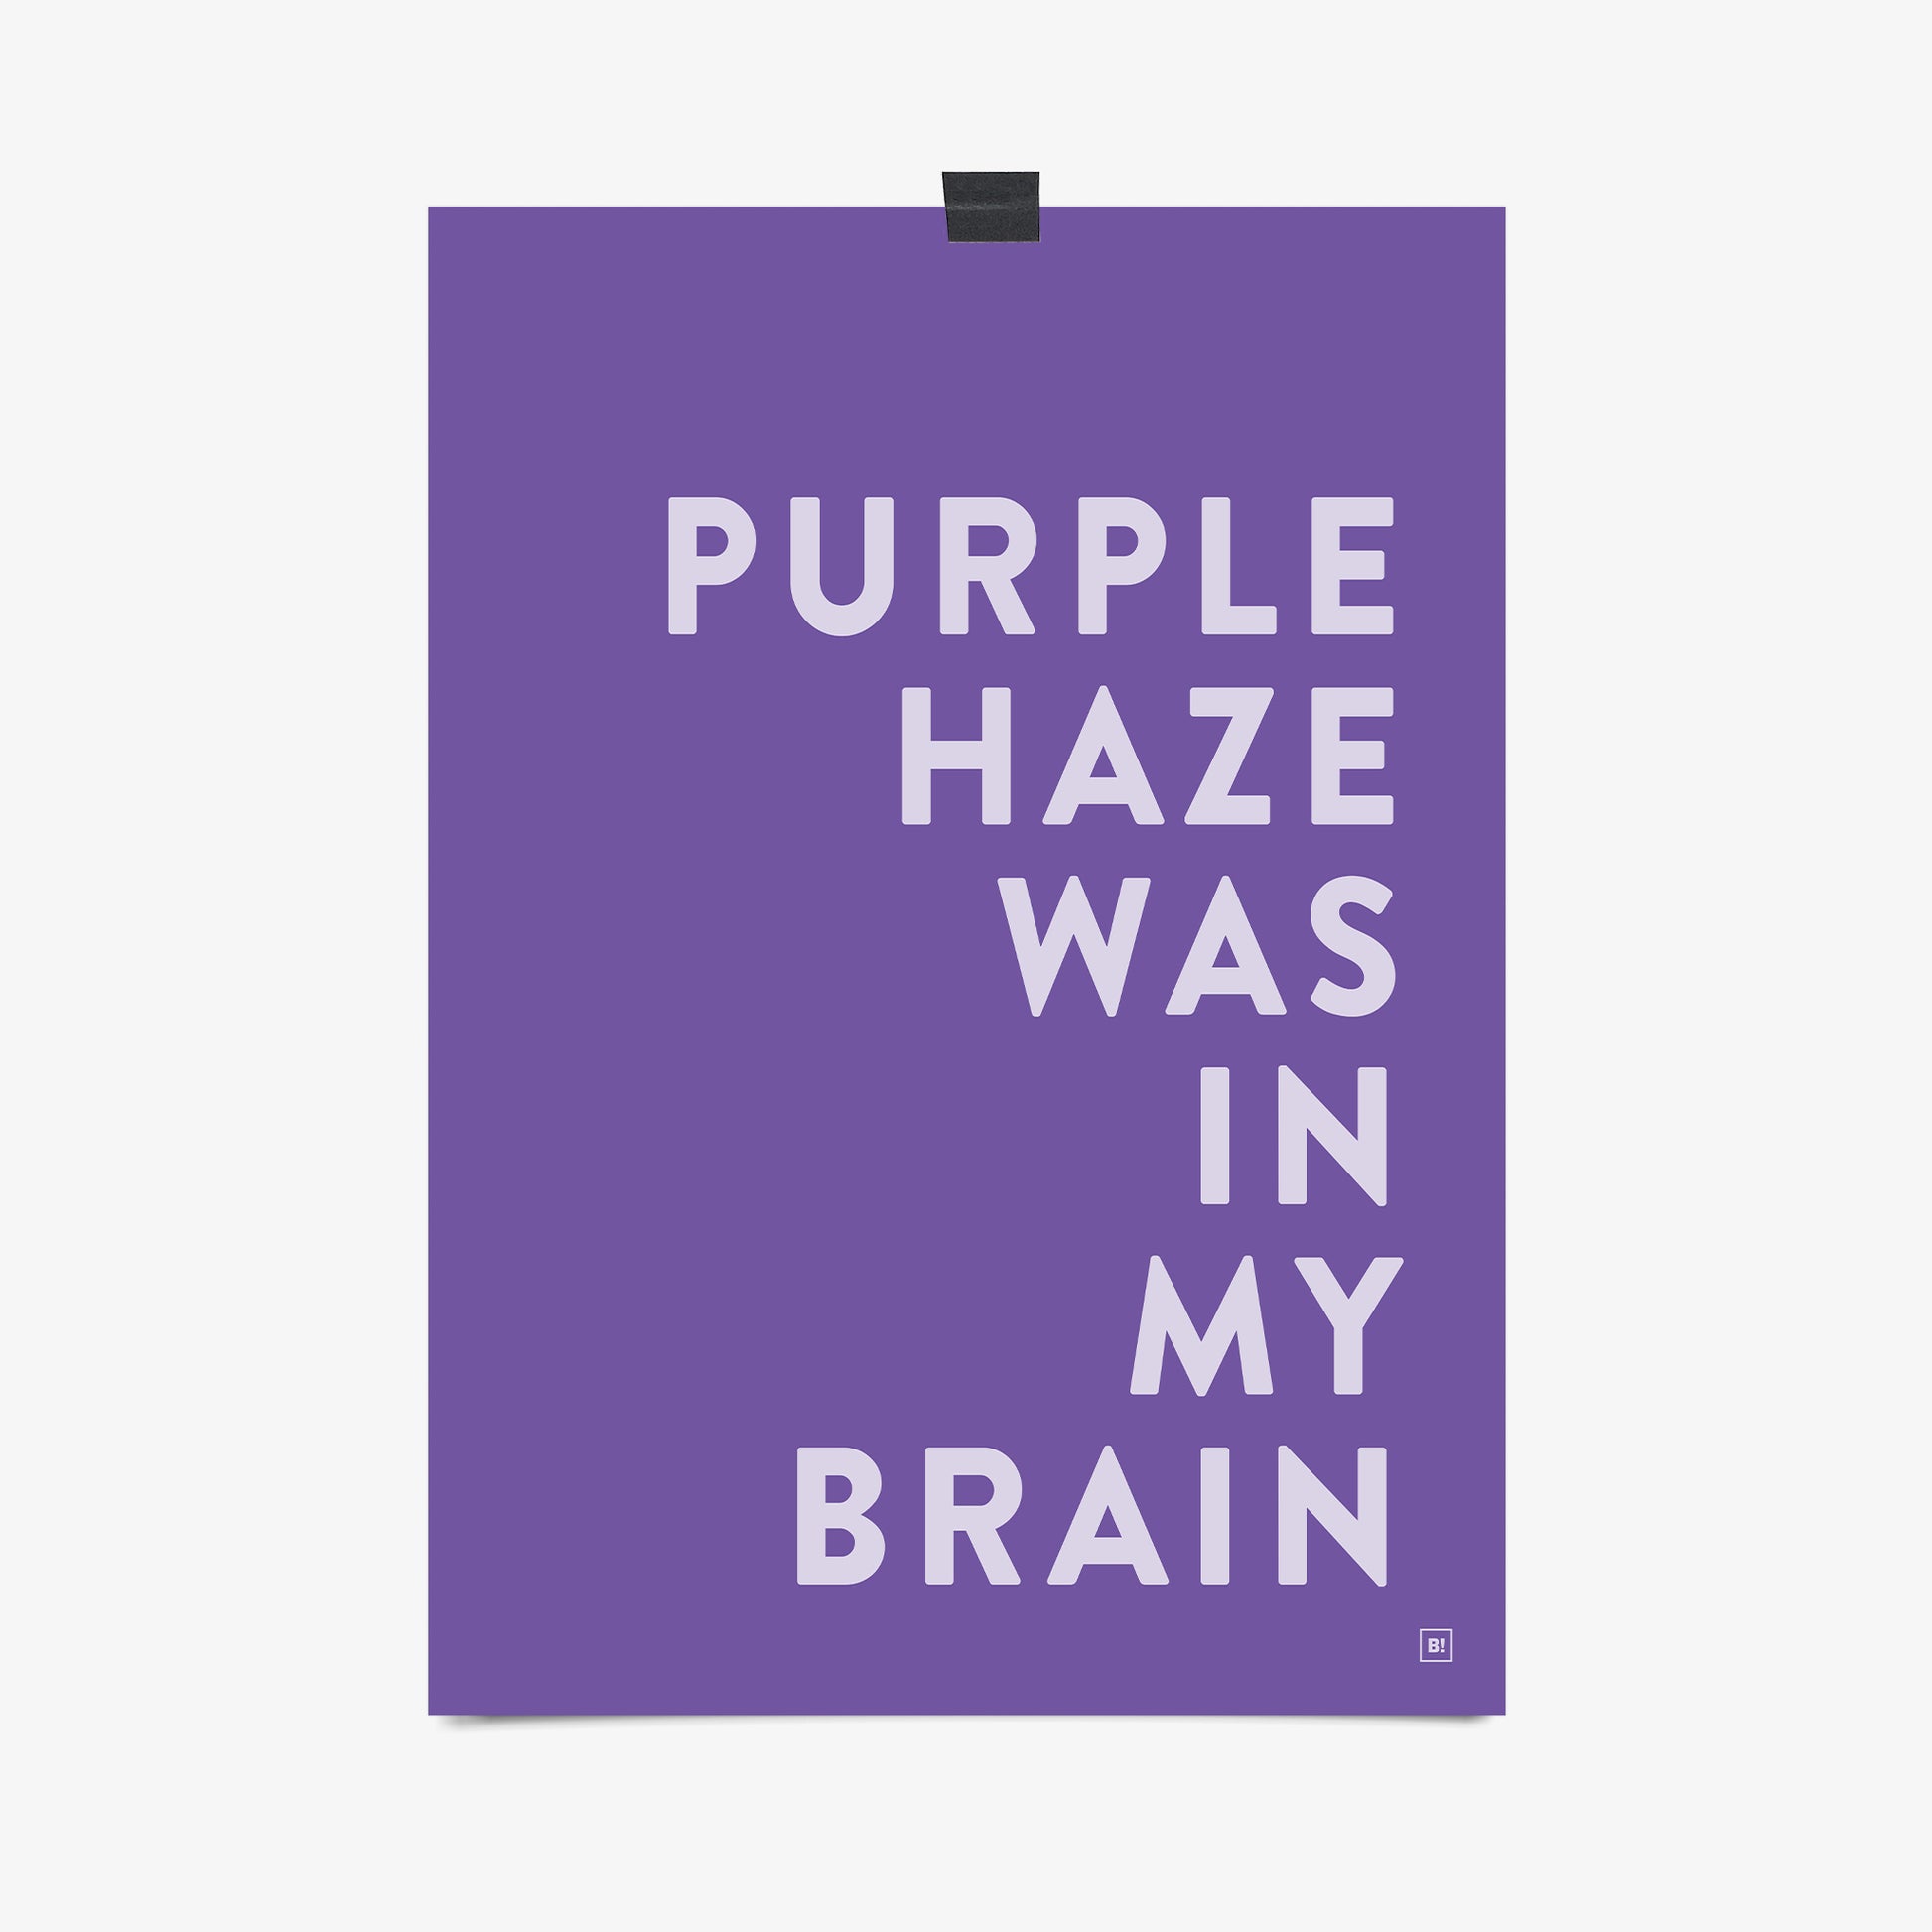 Be inspired by our Jimi Hendrix "Purple Haze Was In My Brain" lyric art print! This artwork was printed using the giclée process on archival acid-free paper, capturing its timeless beauty in every detail.